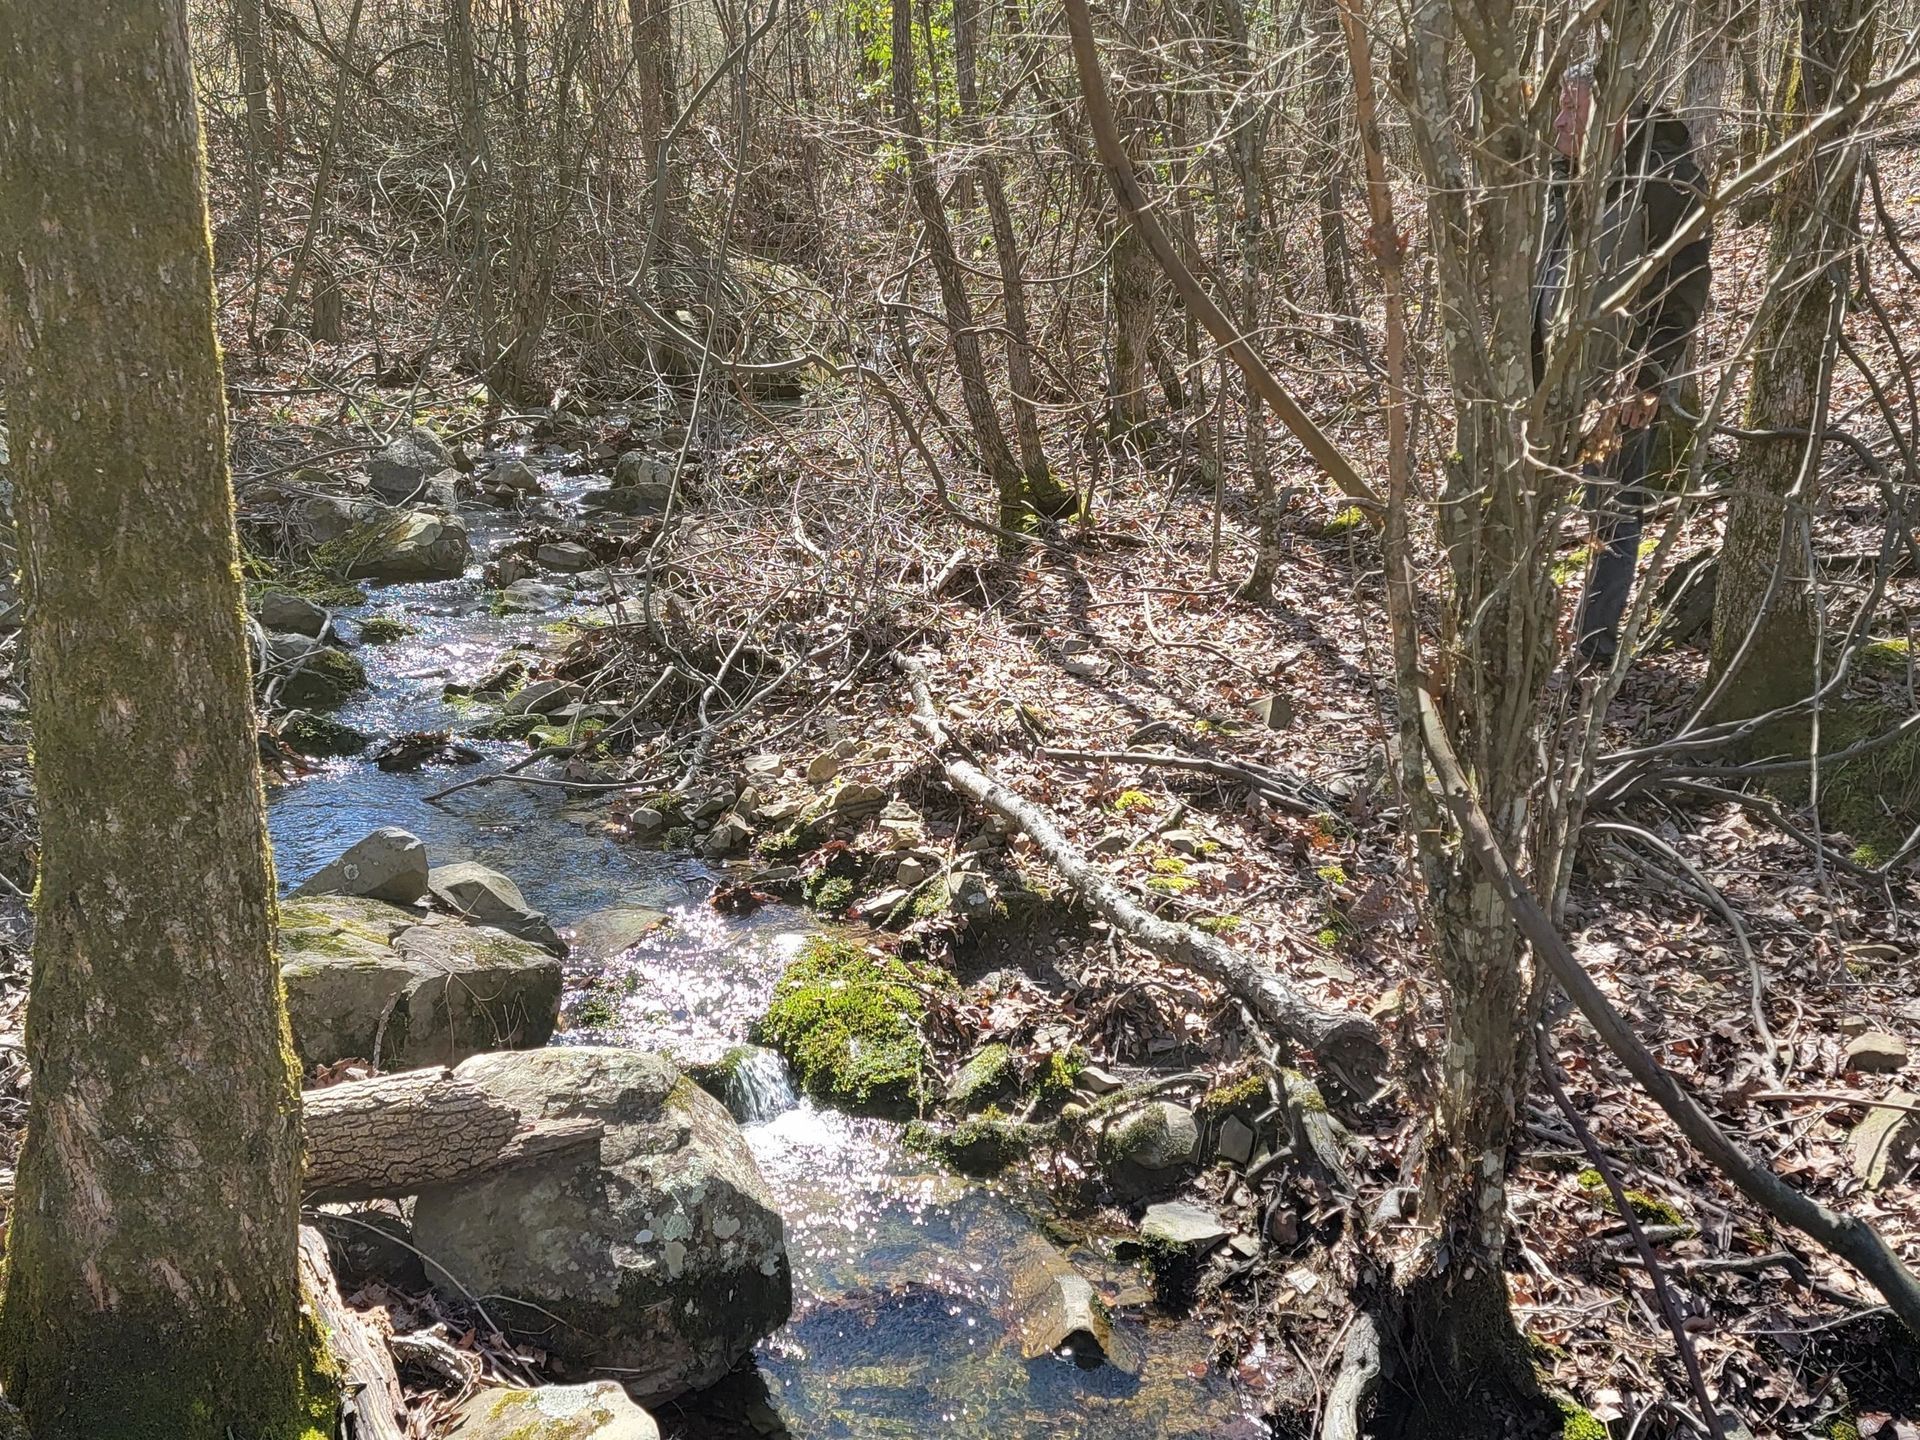 A small stream in the middle of a forest surrounded by trees and rocks.